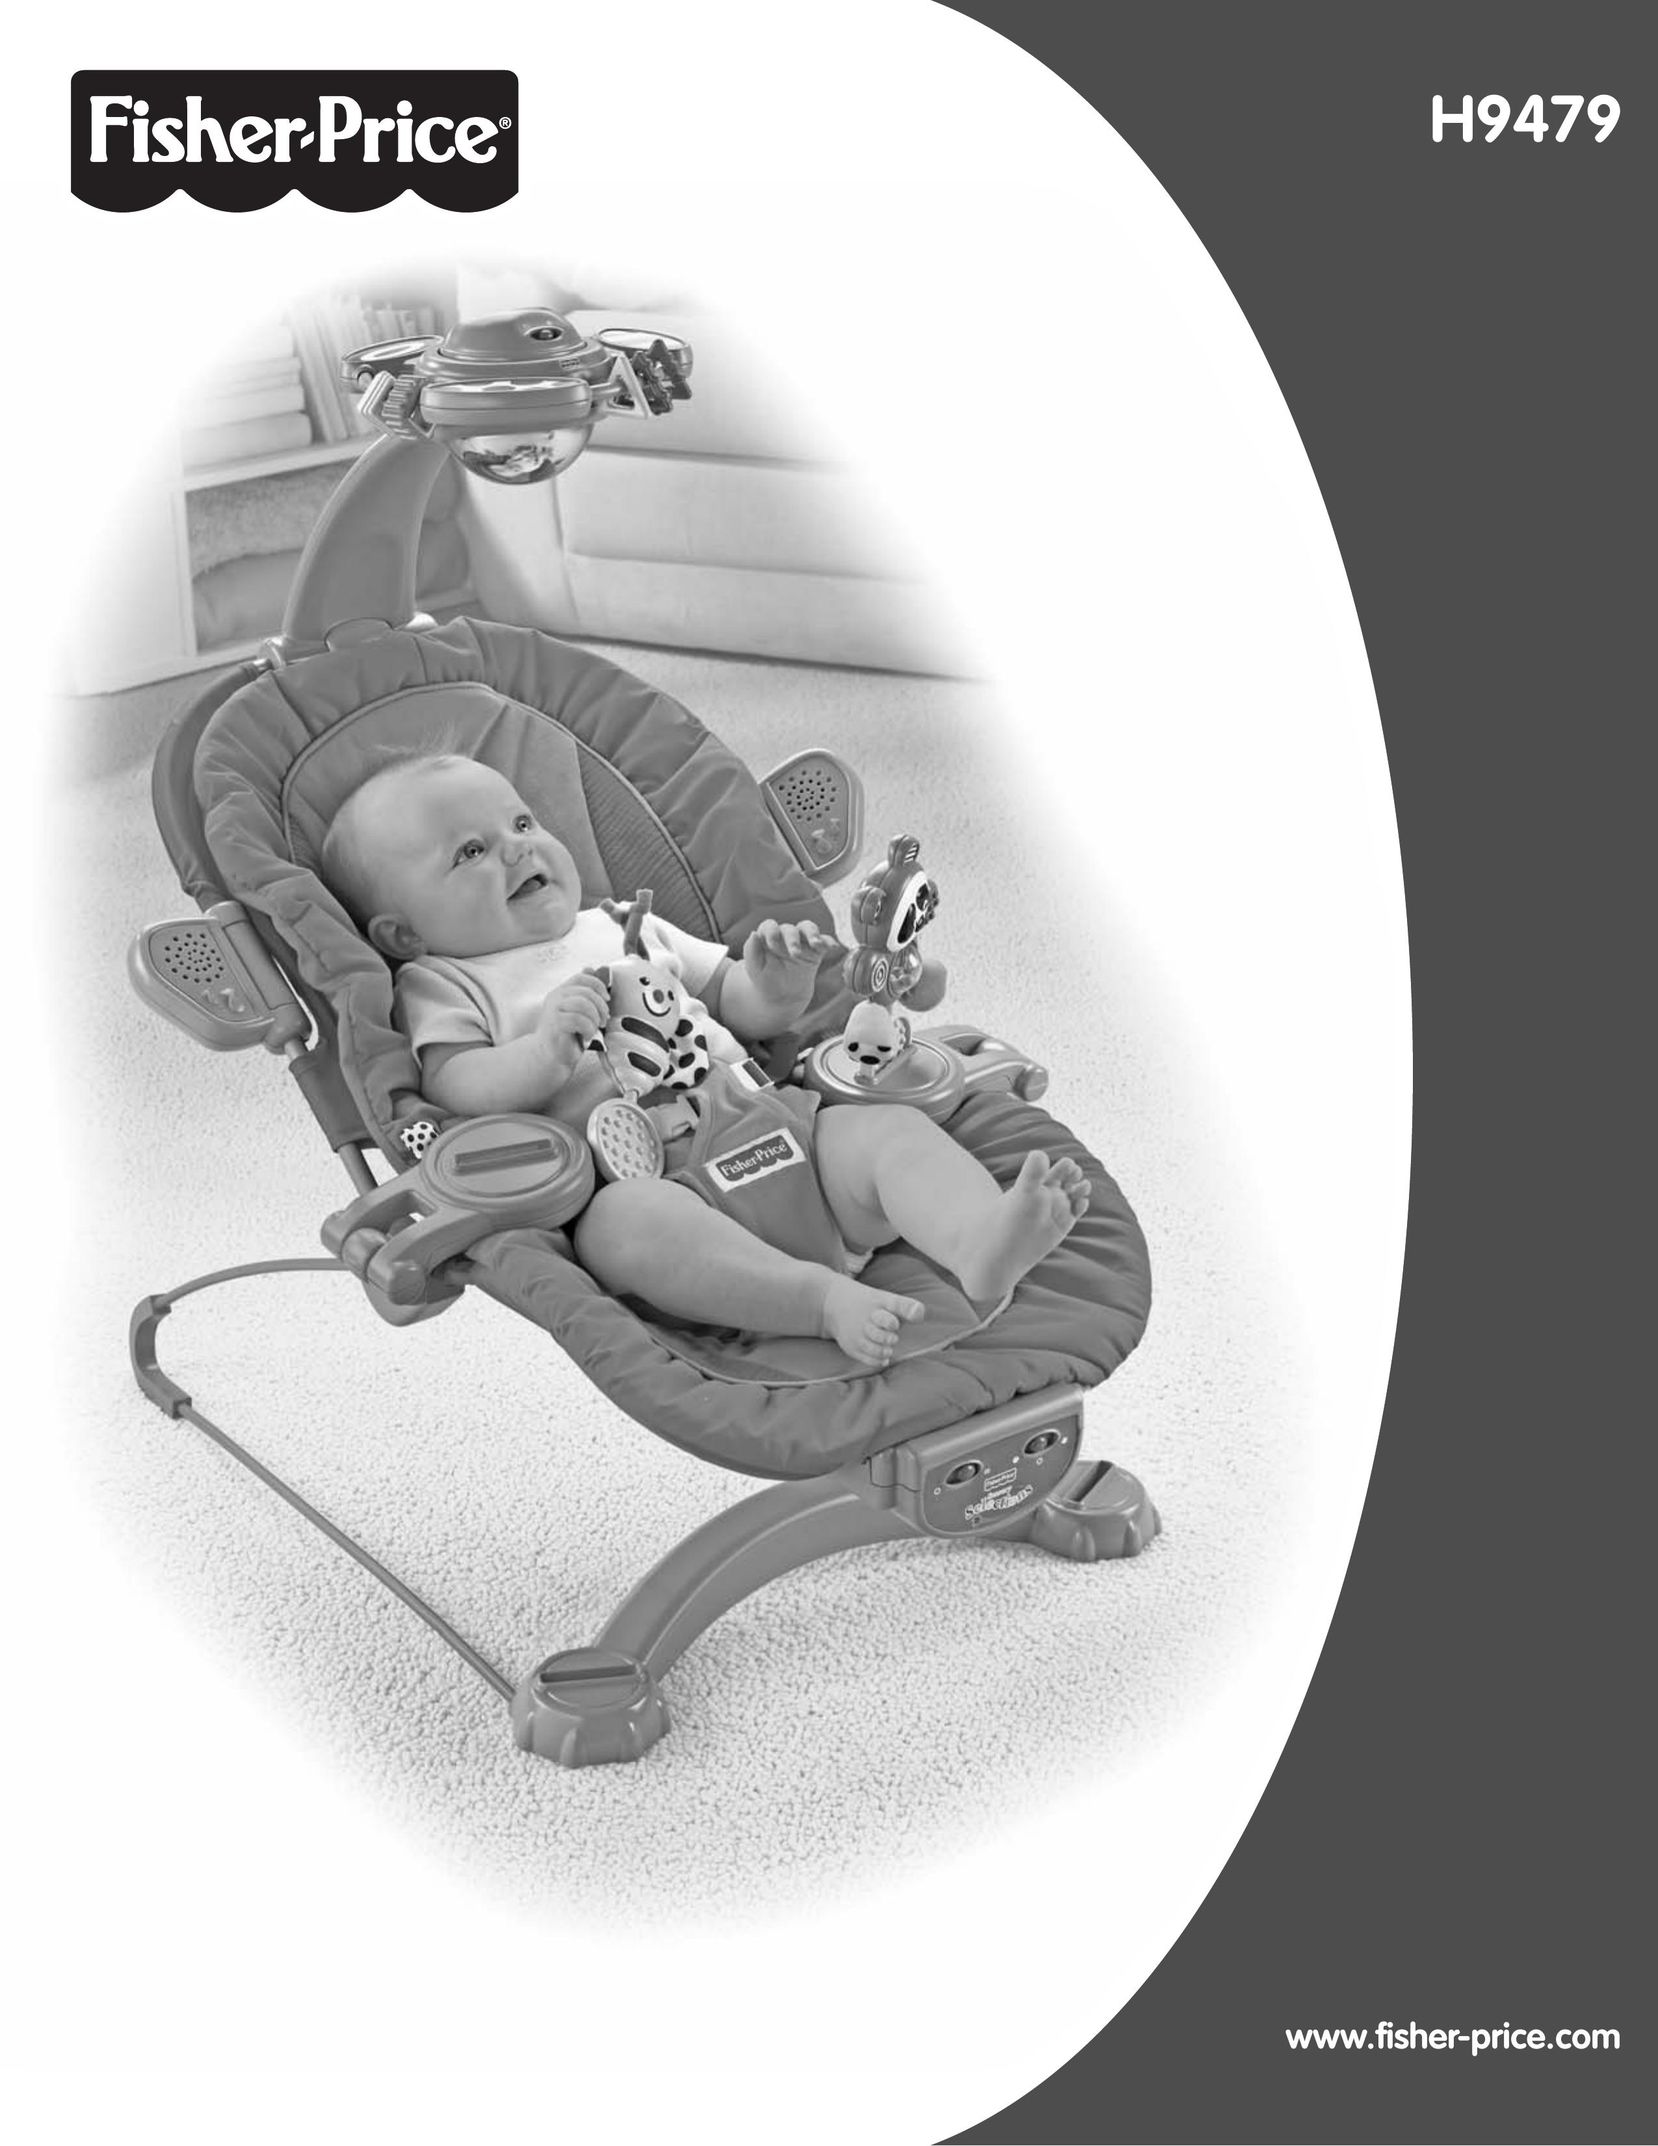 Fisher-Price H9479 Baby Carrier User Manual (Page 1)